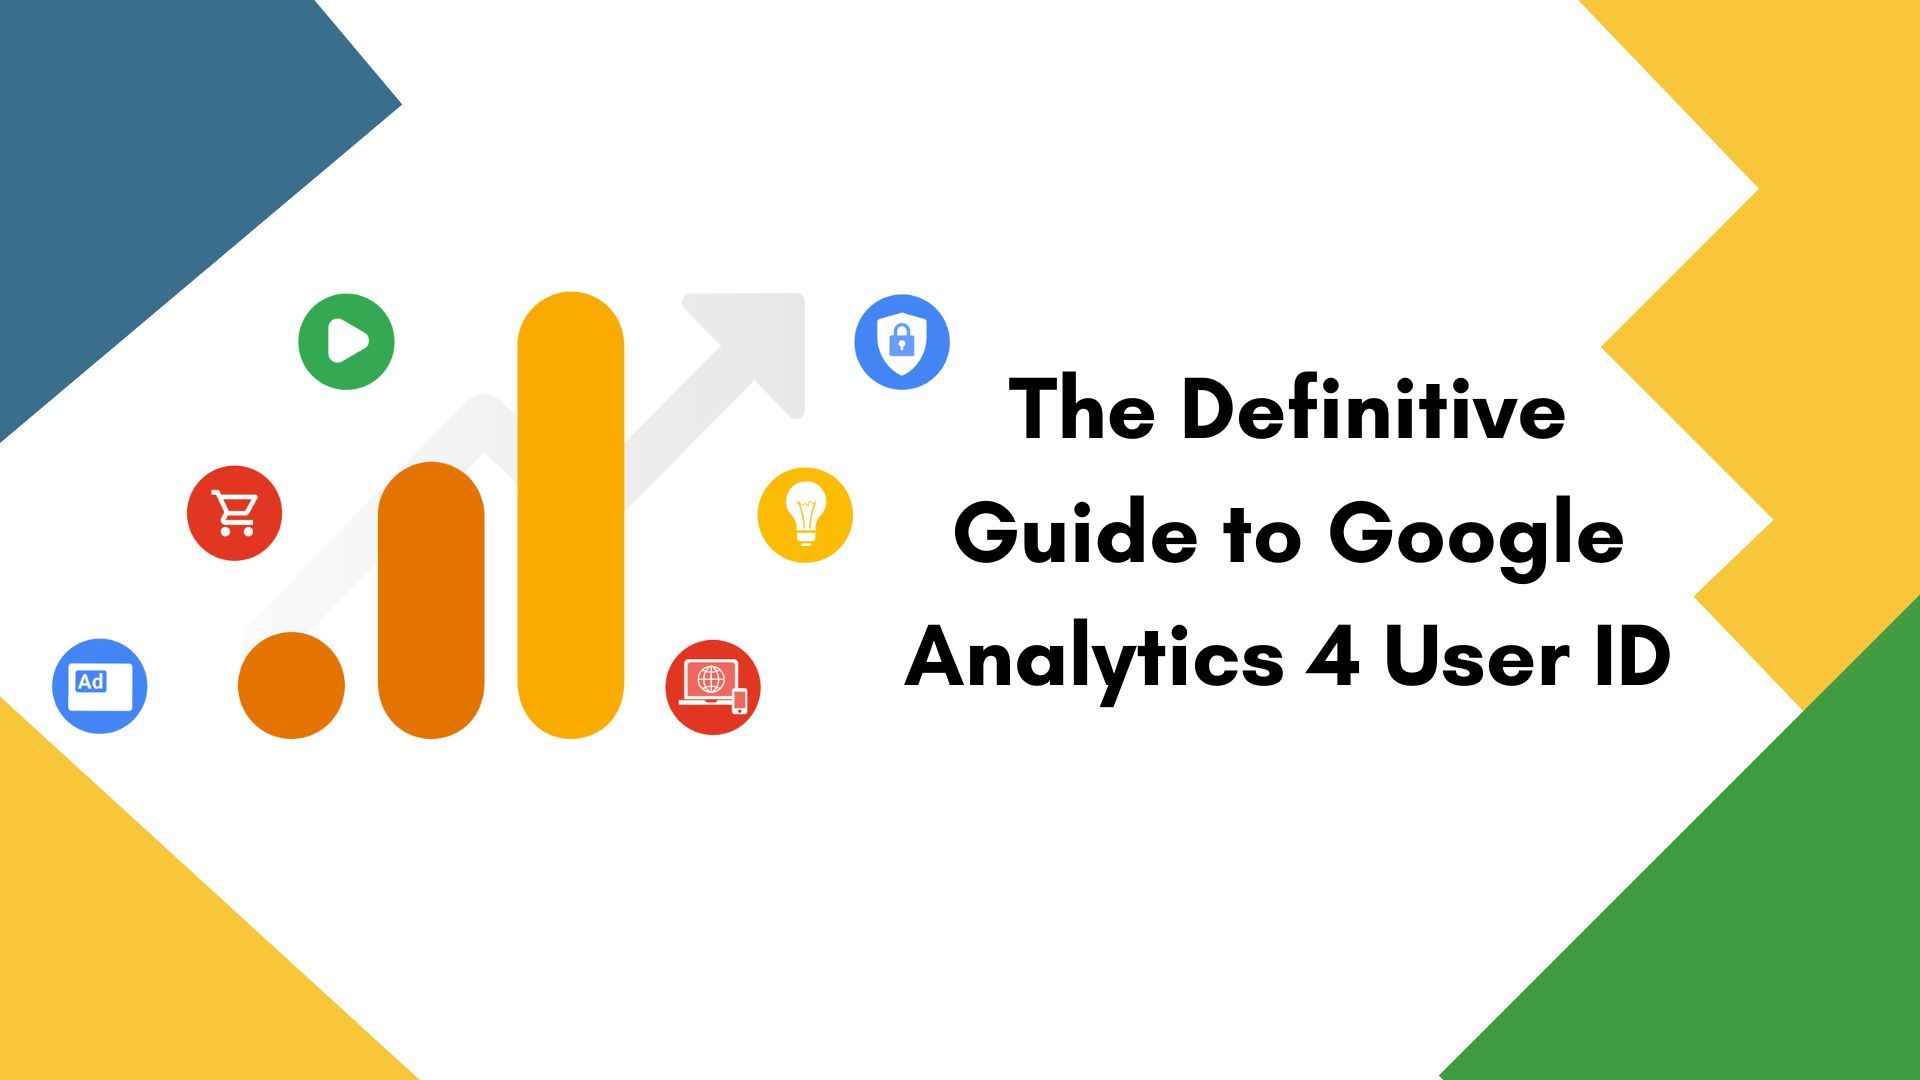 The Definitive Guide to Google Analytics 4 User ID